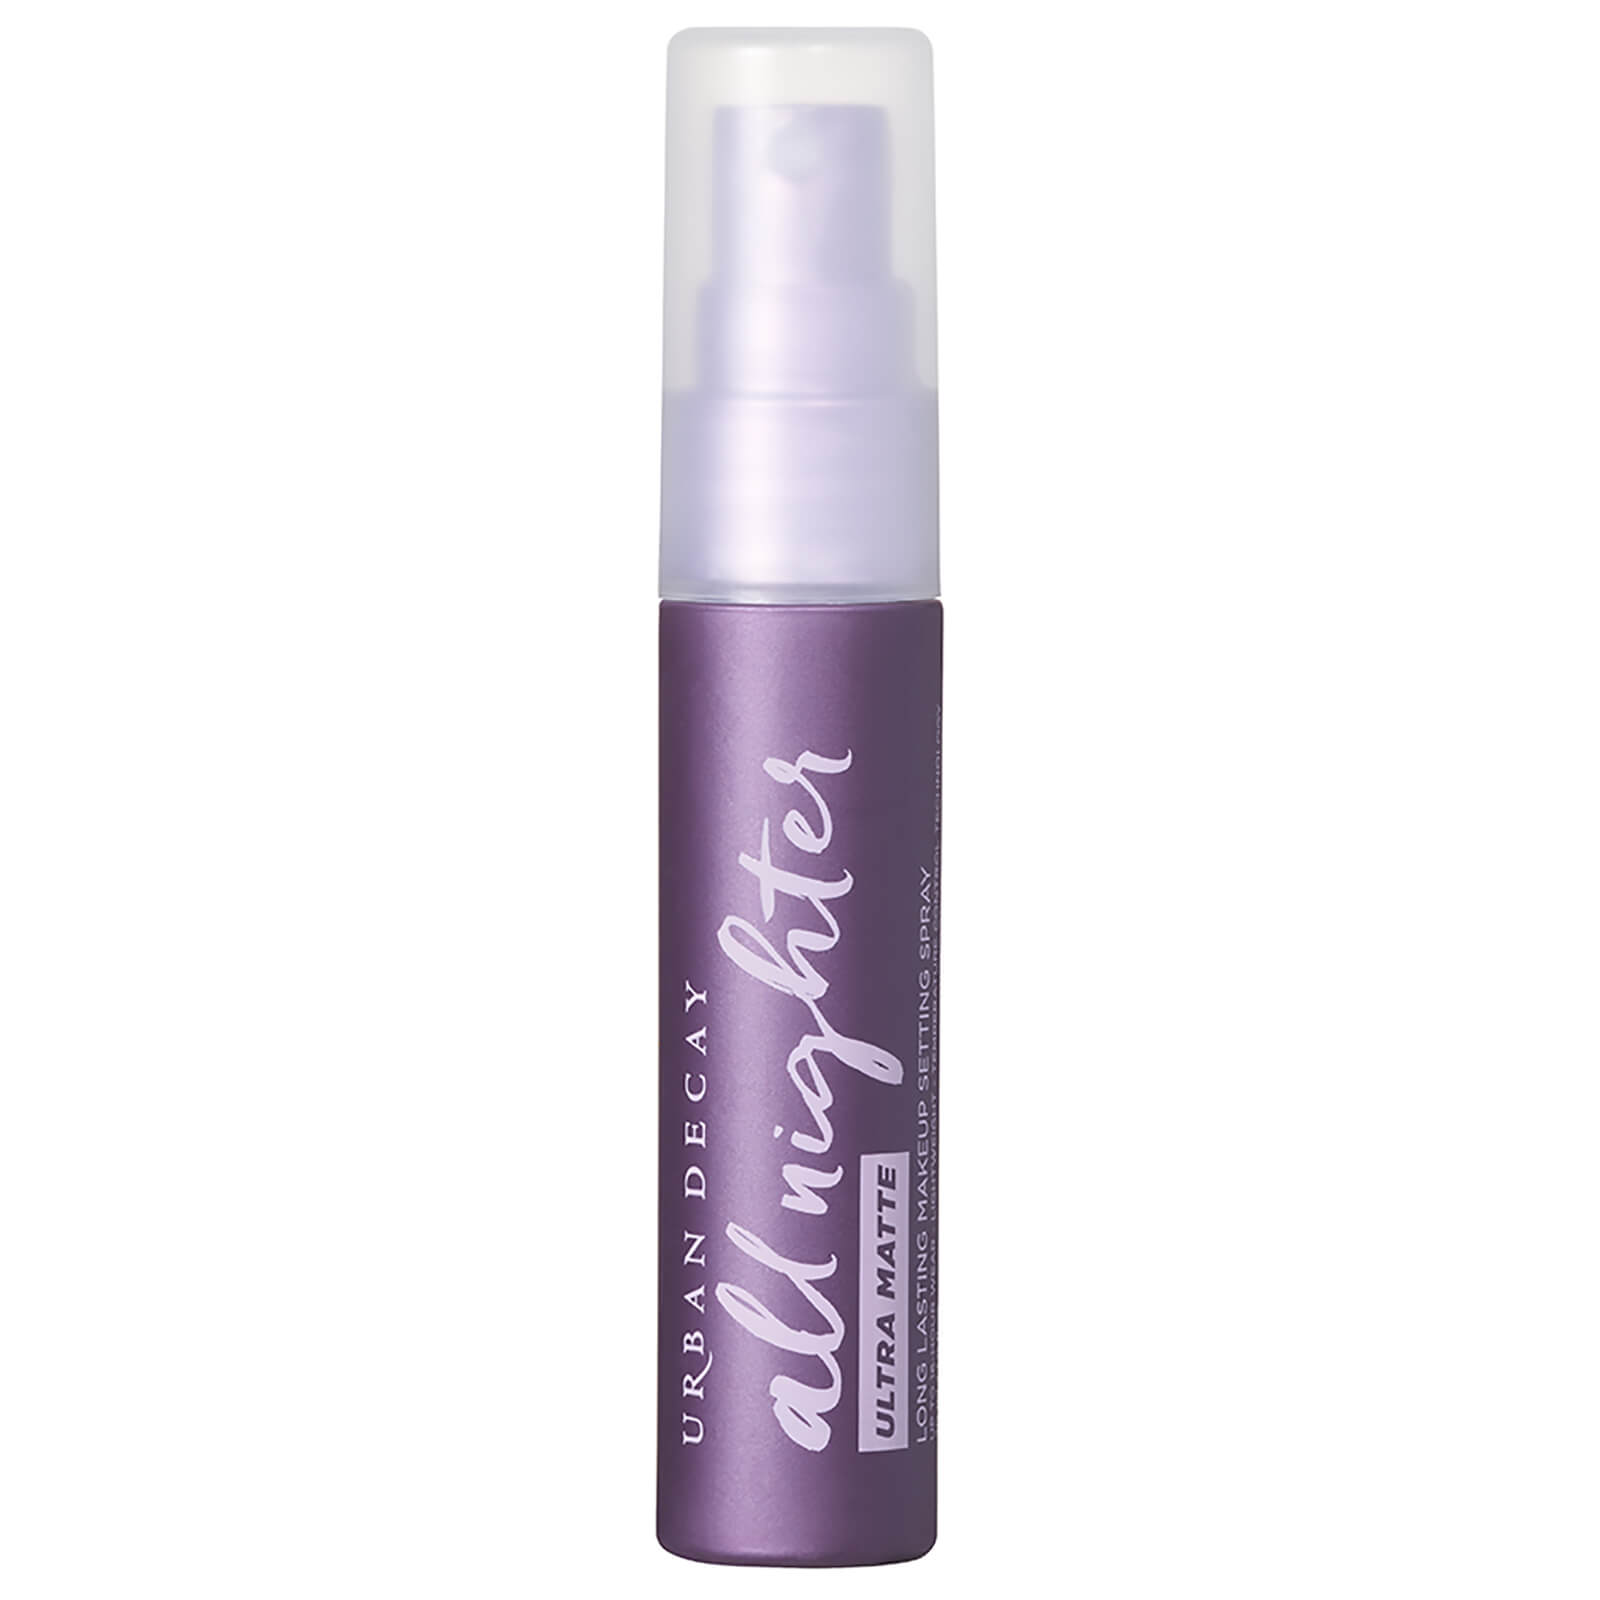 Image of Urban Decay All Nighter Setting Spray Ultra Matte Travel